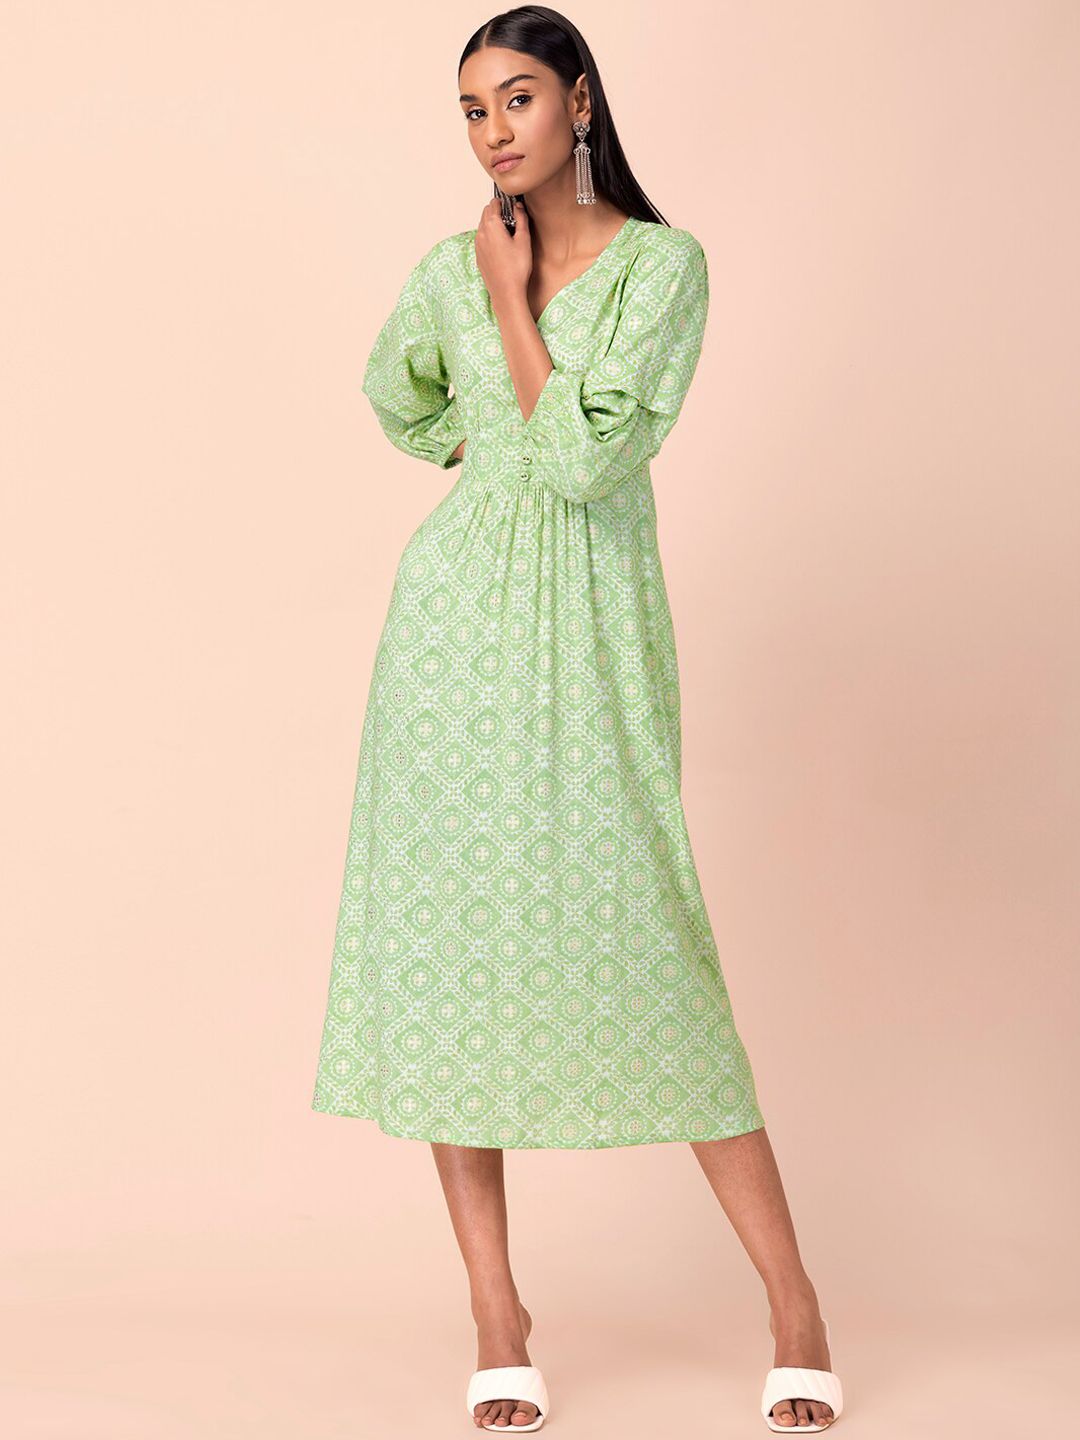 INDYA Green Floral Pleated A-Line Dress Price in India